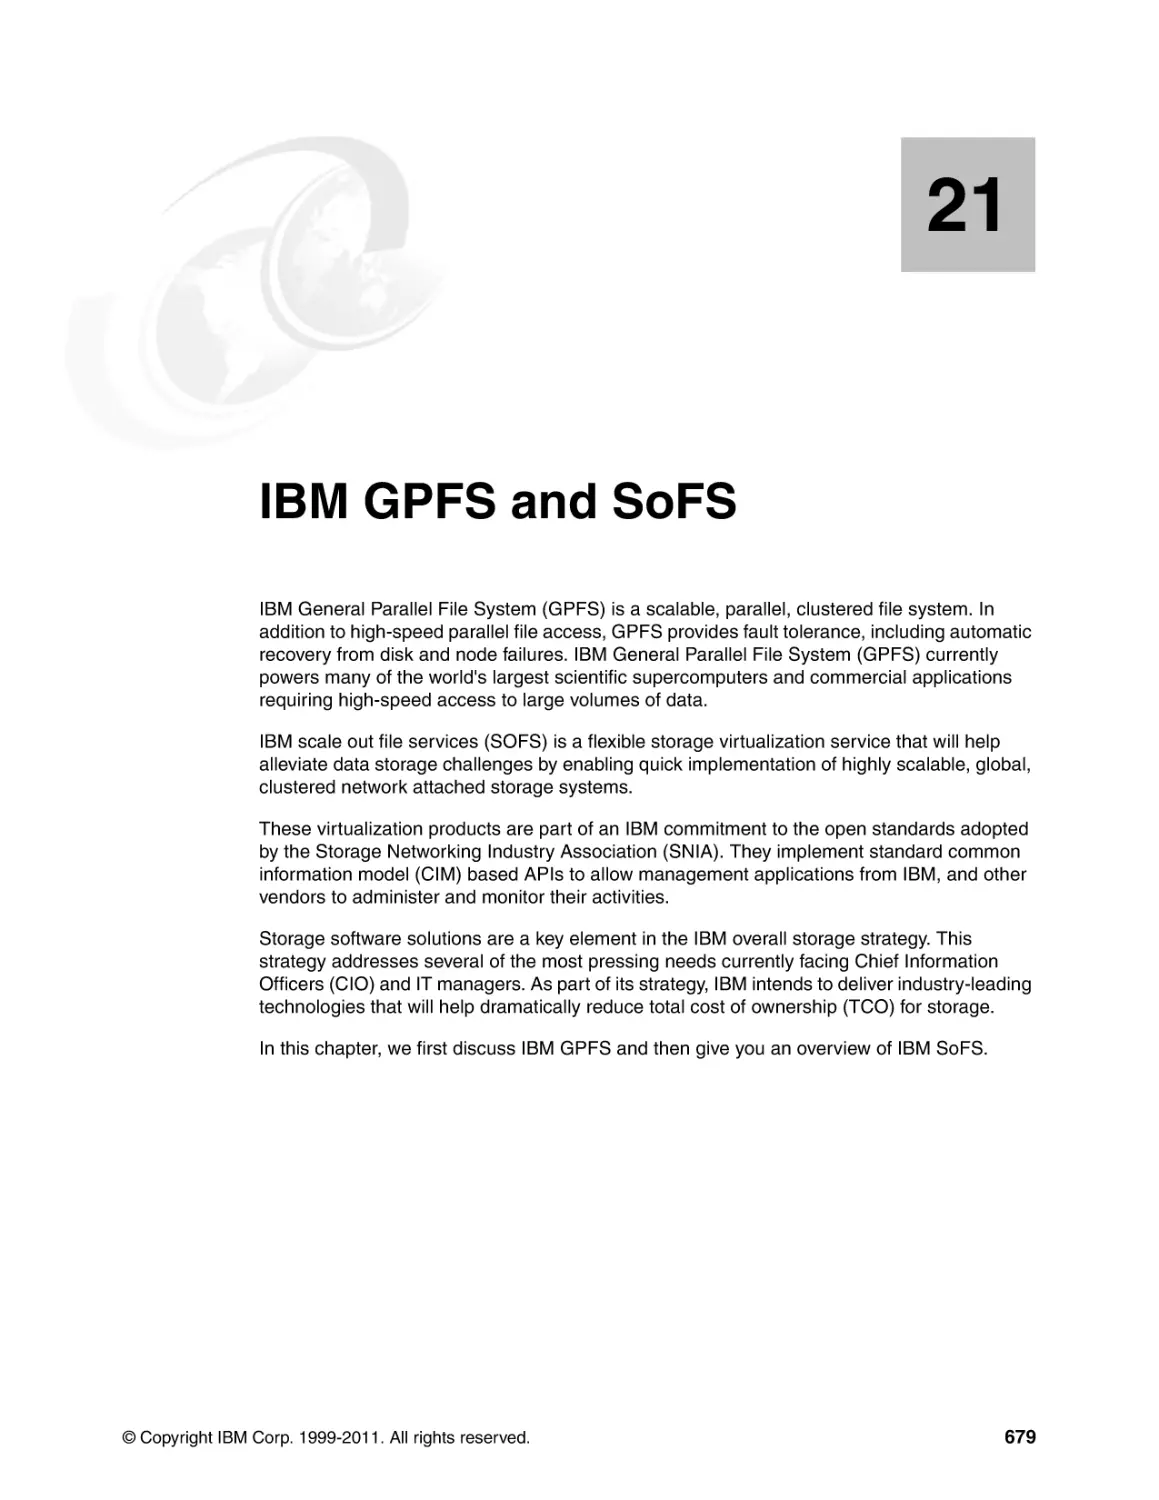 Chapter 21. IBM GPFS and SoFS